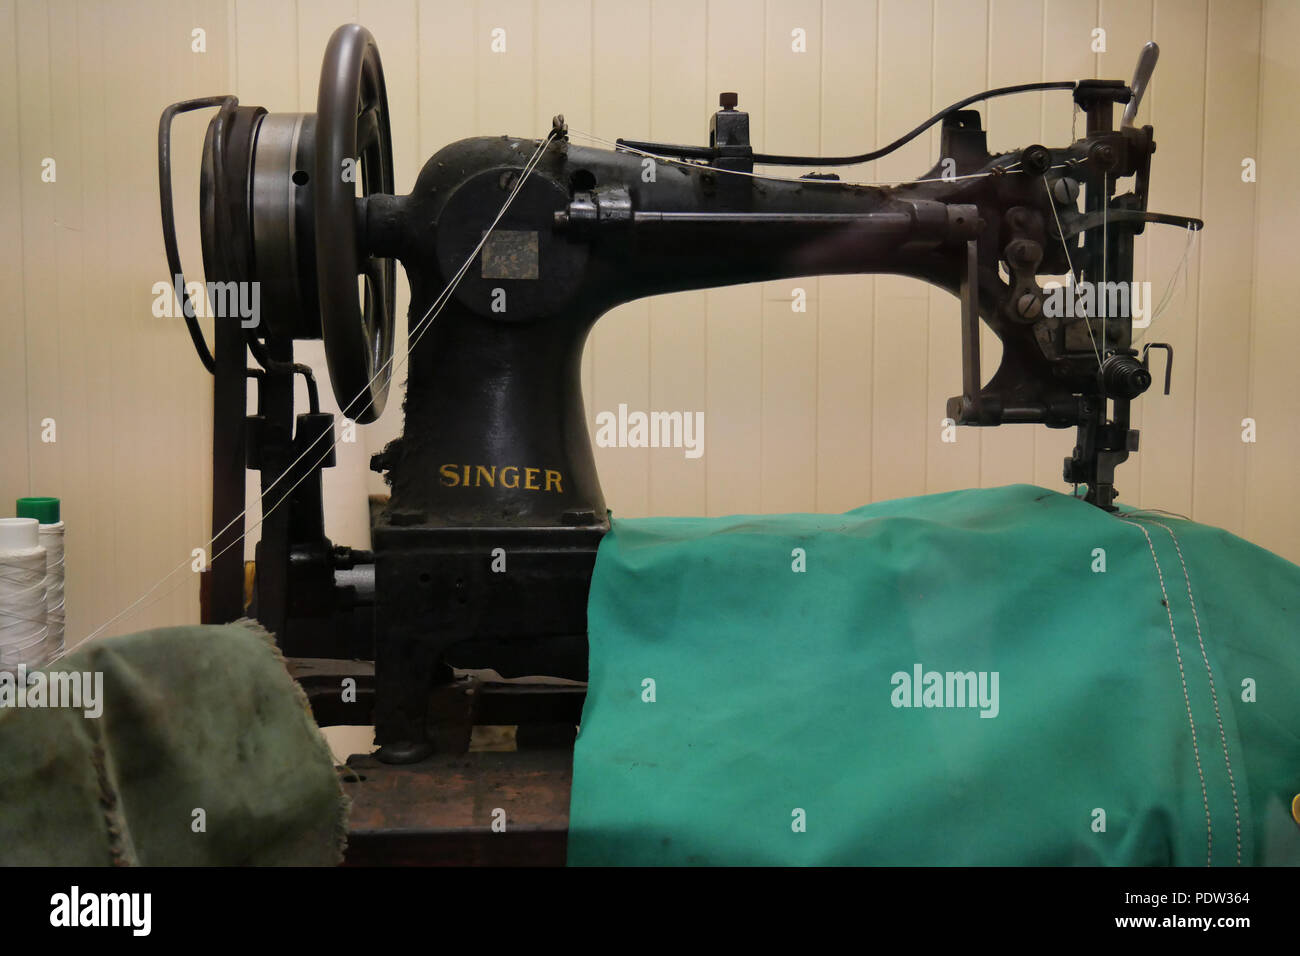 National Waterways Museum, Ellesmere Port, Cheshire, CH65 4FW, UK. Aug- 02 2018 - Old Singer Sewing Machine with Can-vas Sail Sheet being worked on. Stock Photo